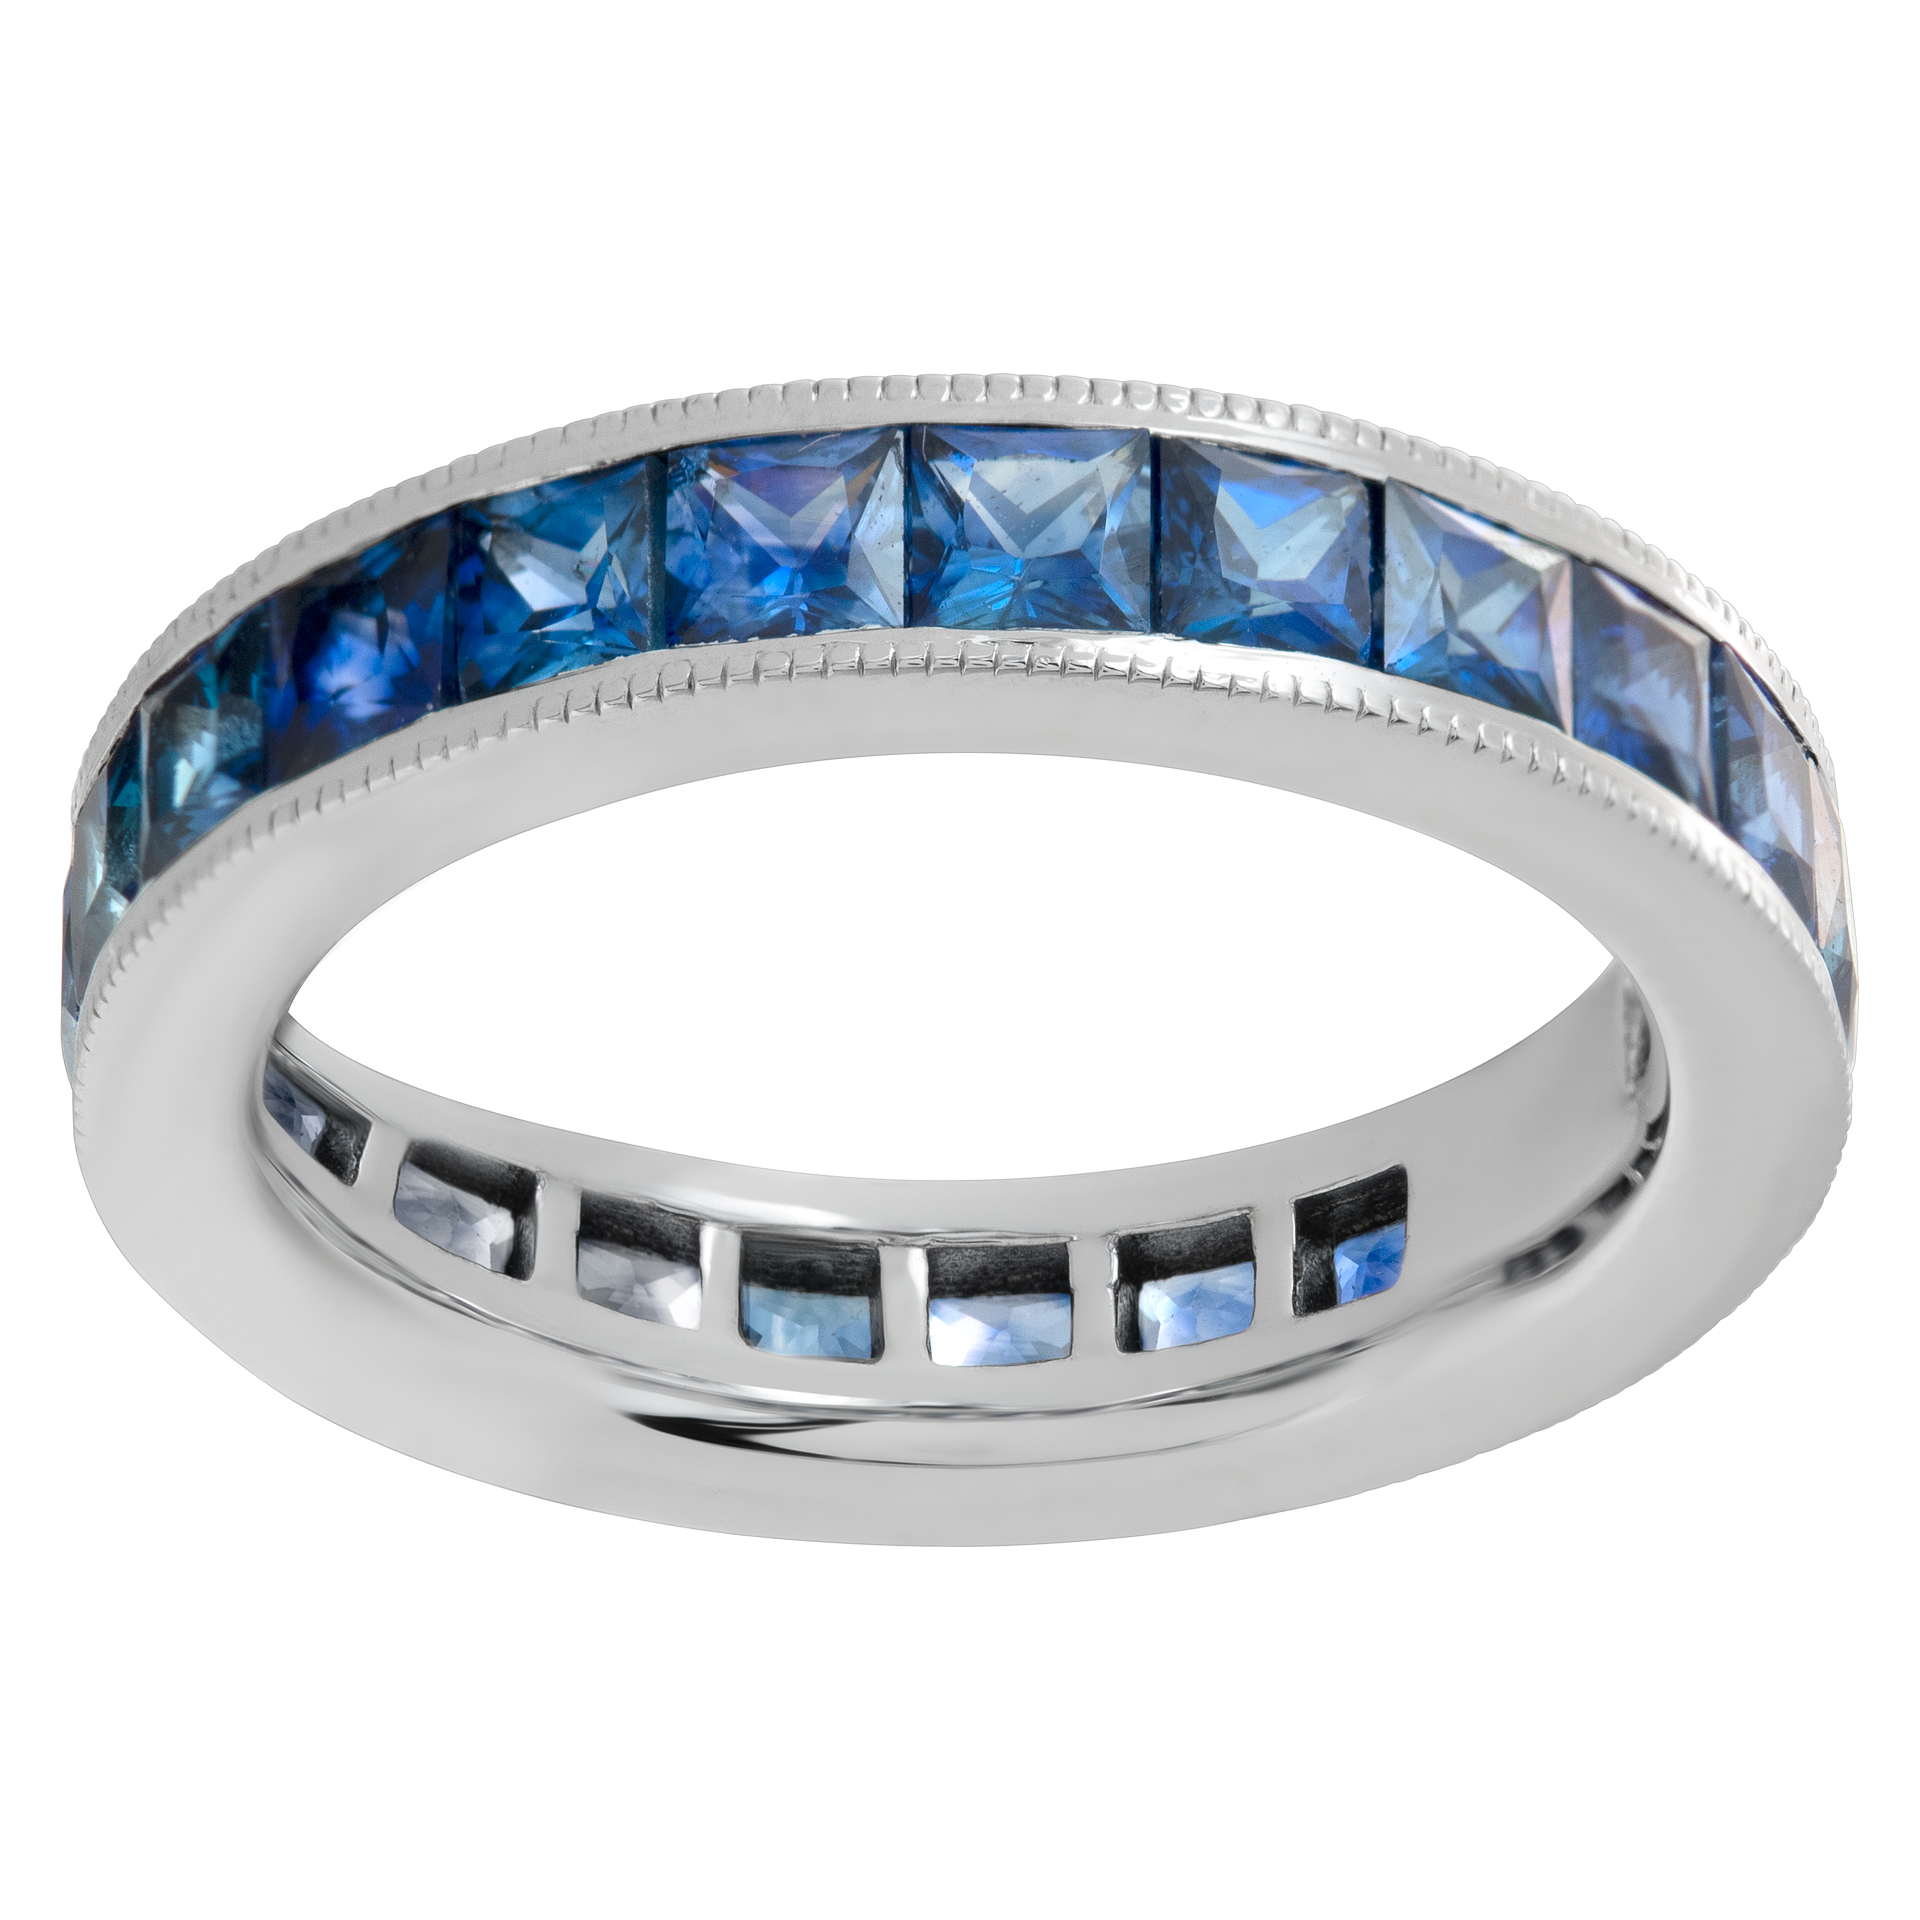 Blue sapphire eternity band in 14k white gold